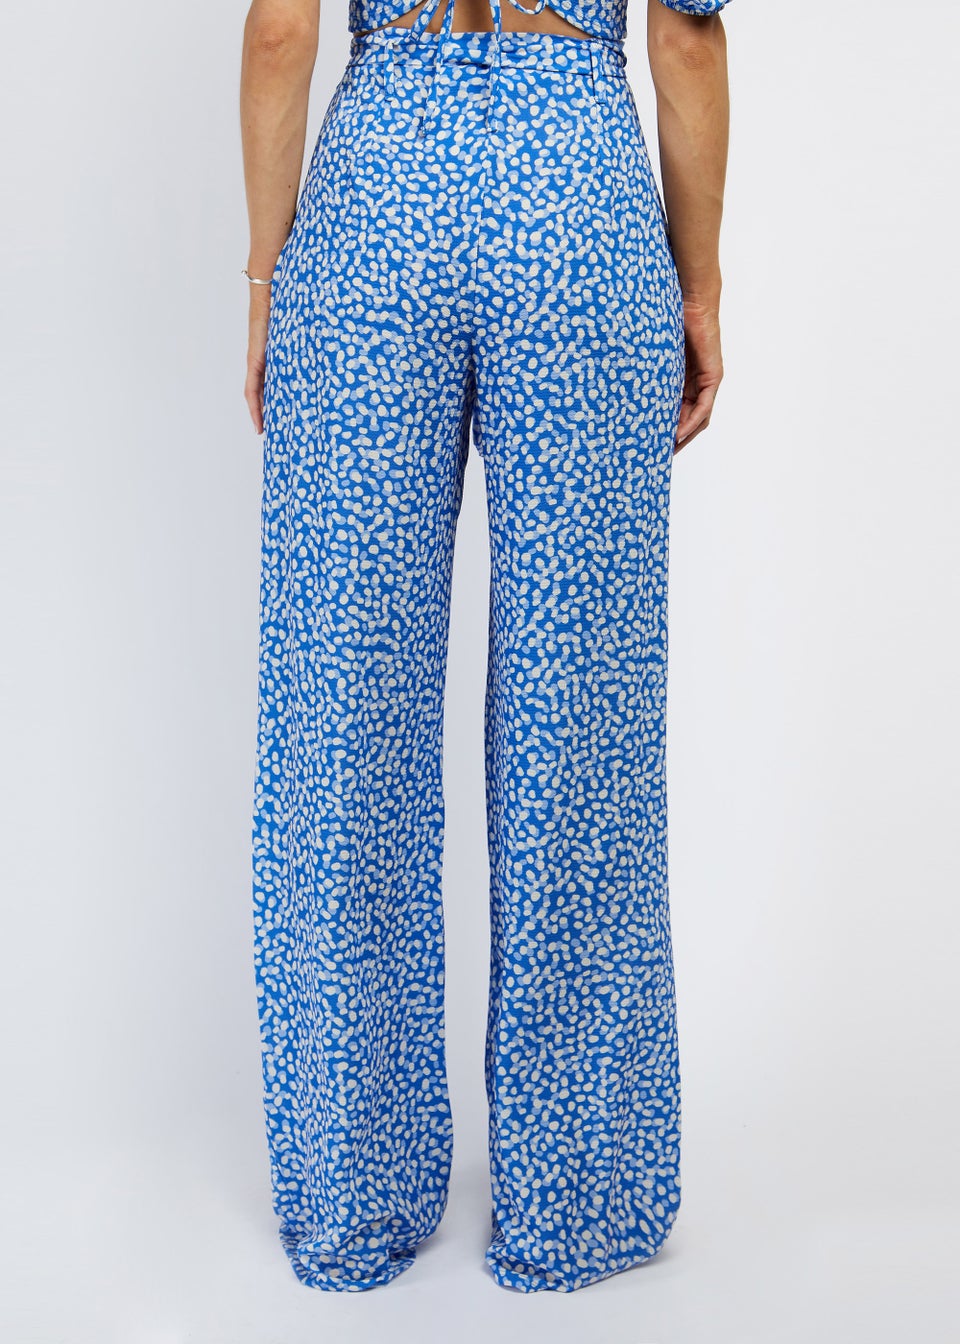 Girls on Film by Dani Dyer Blue Floral Wide Leg Co-Ord Trousers